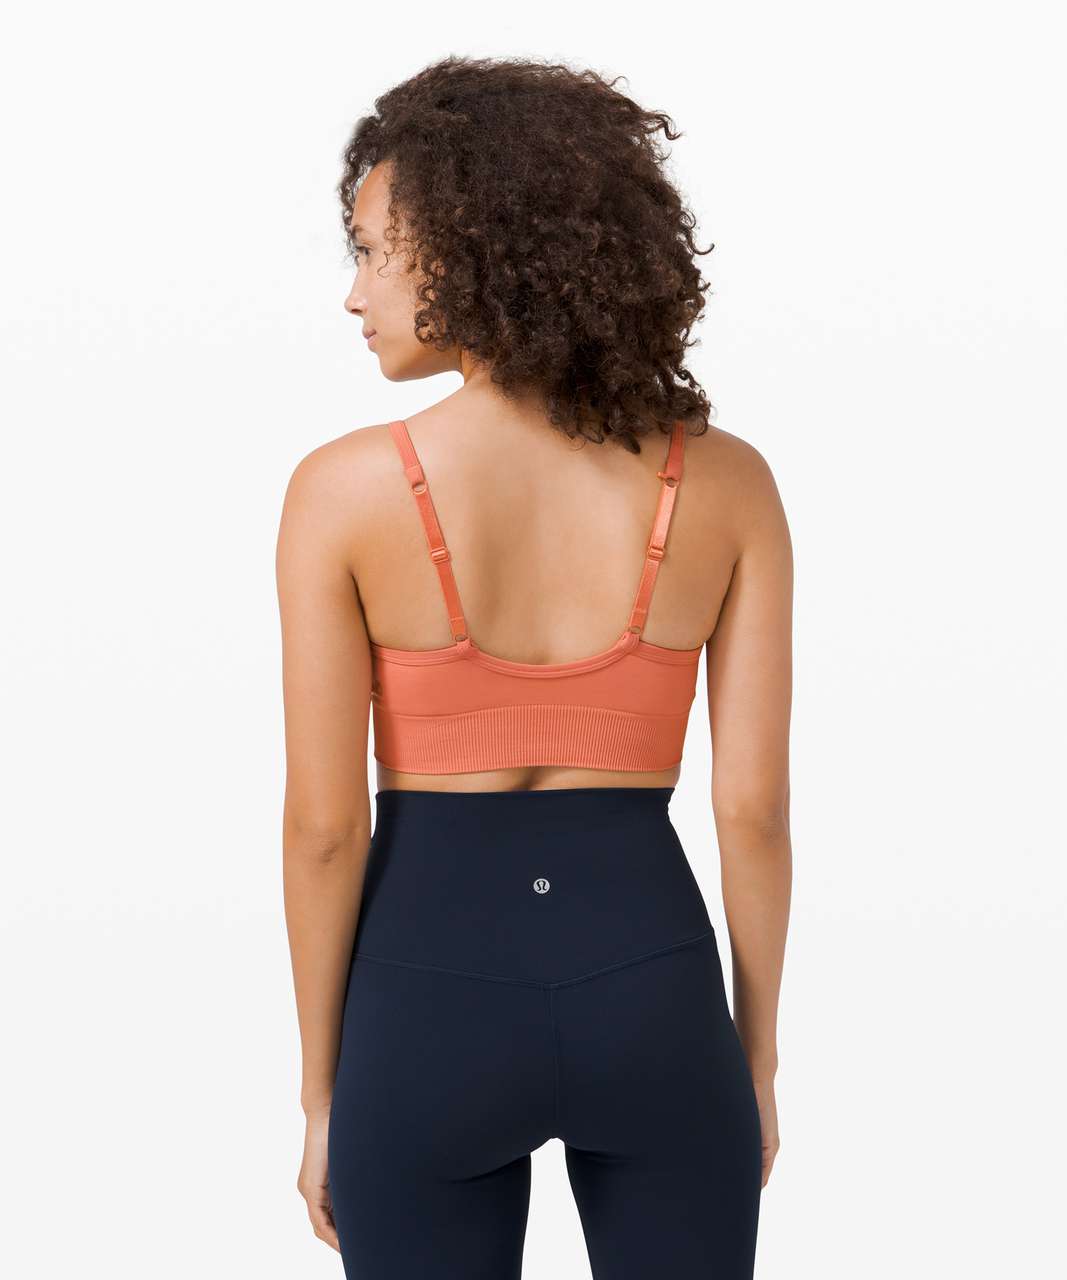 Lululemon Ebb to Street Bra *Light Support, C/D Cup - Rustic Coral